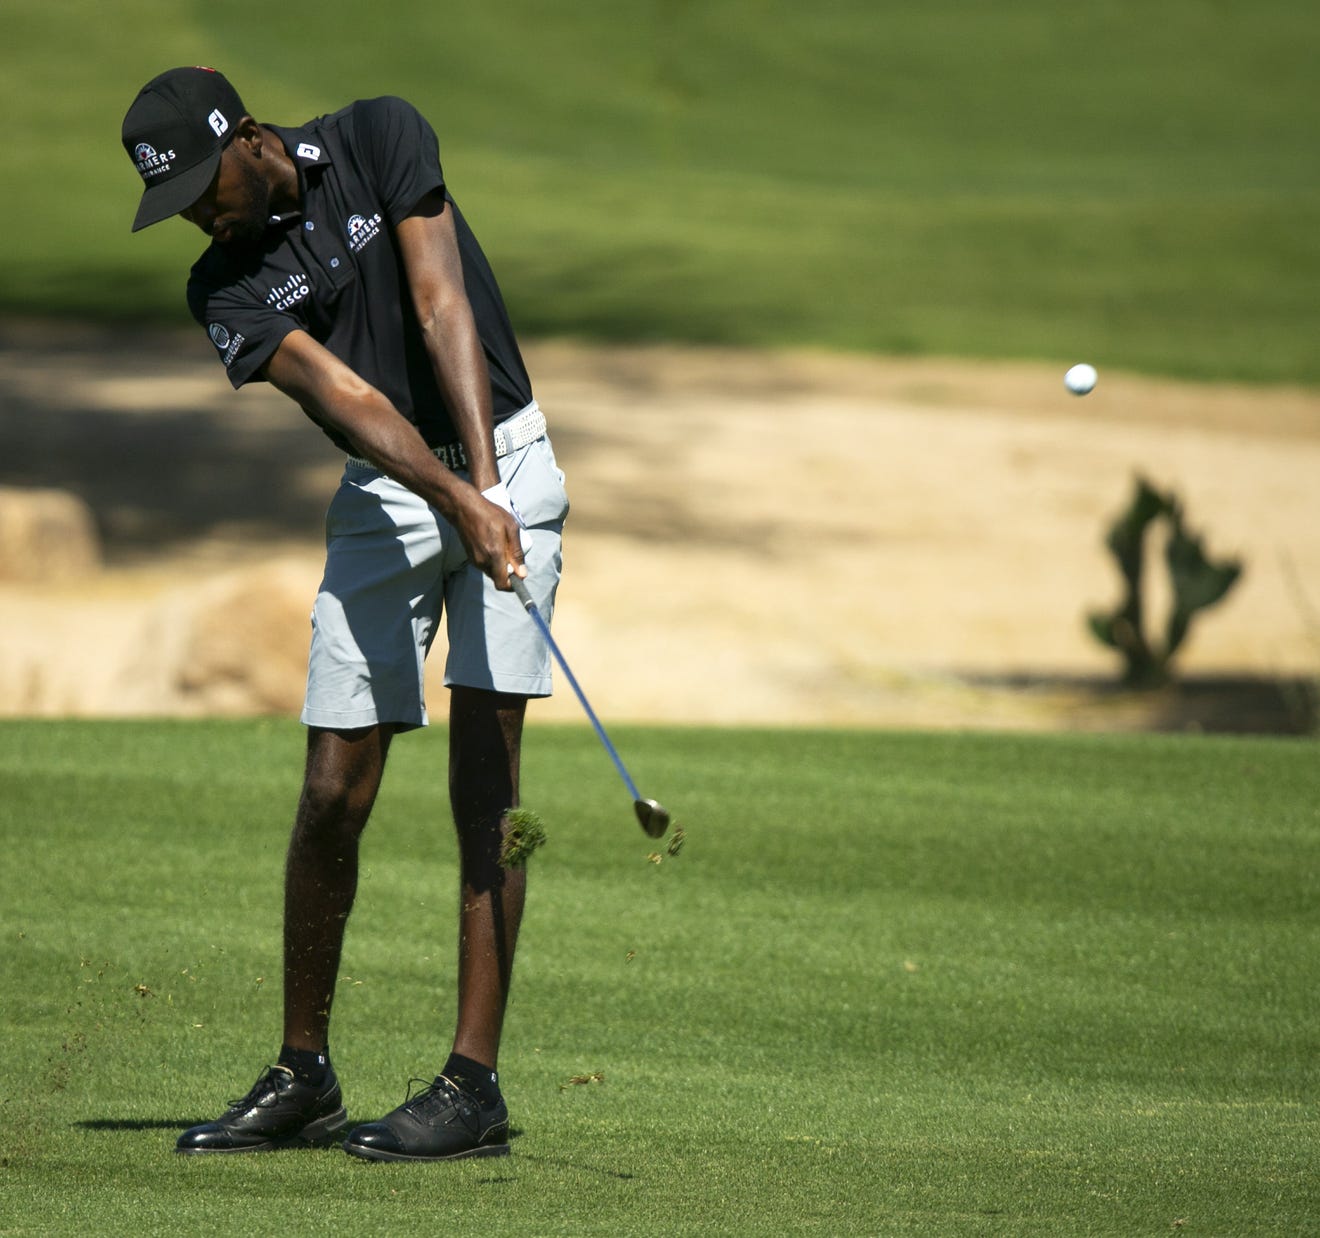 Advocates tour 'blessing' for Black golfers looking for career support